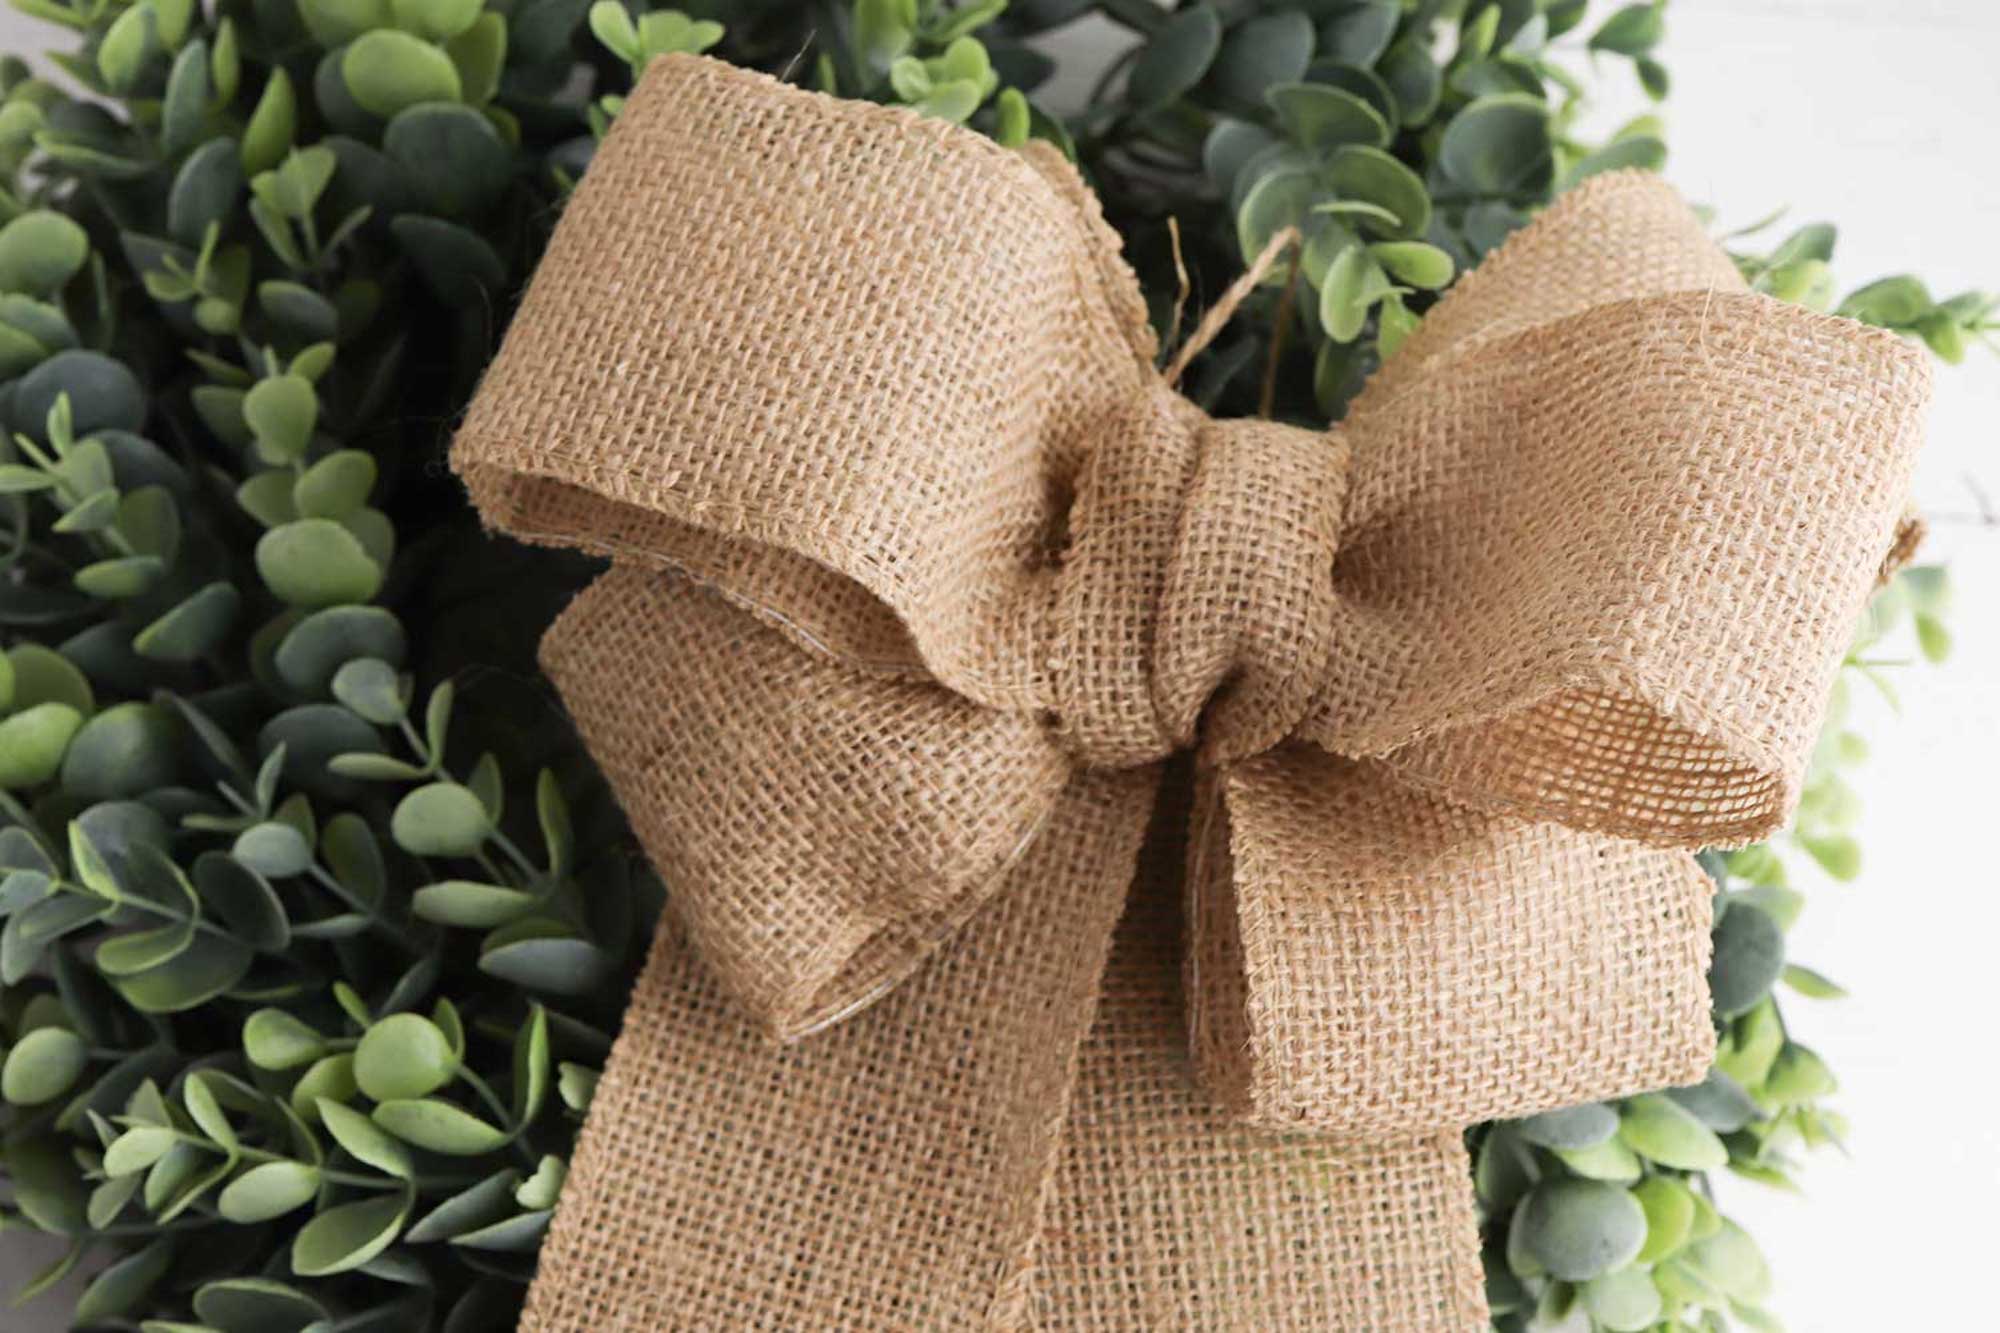 How To Make A Burlap Bow For A Wreath Or Home Decor